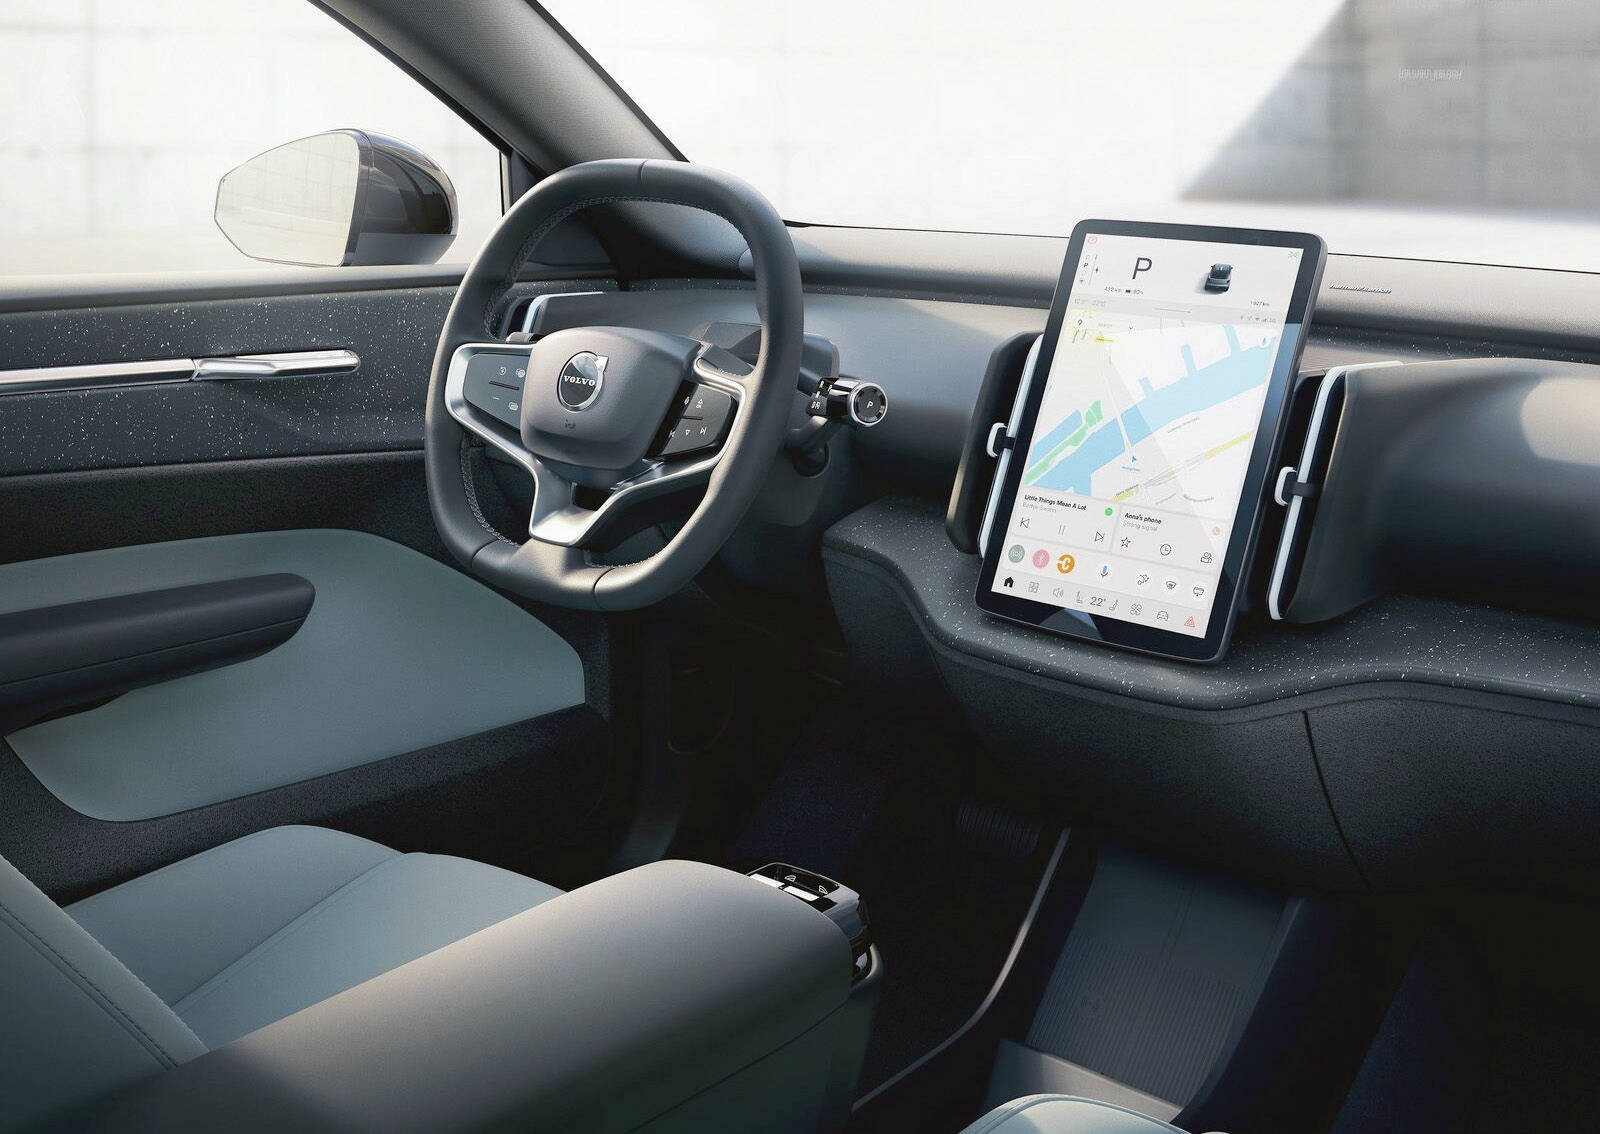 Other than a 12.3-inch touch-screen containing both the drivers information plus infotainment, climate and navigations operations, the dashboard is empty, save for the air vents. PHOTO: VOLVO